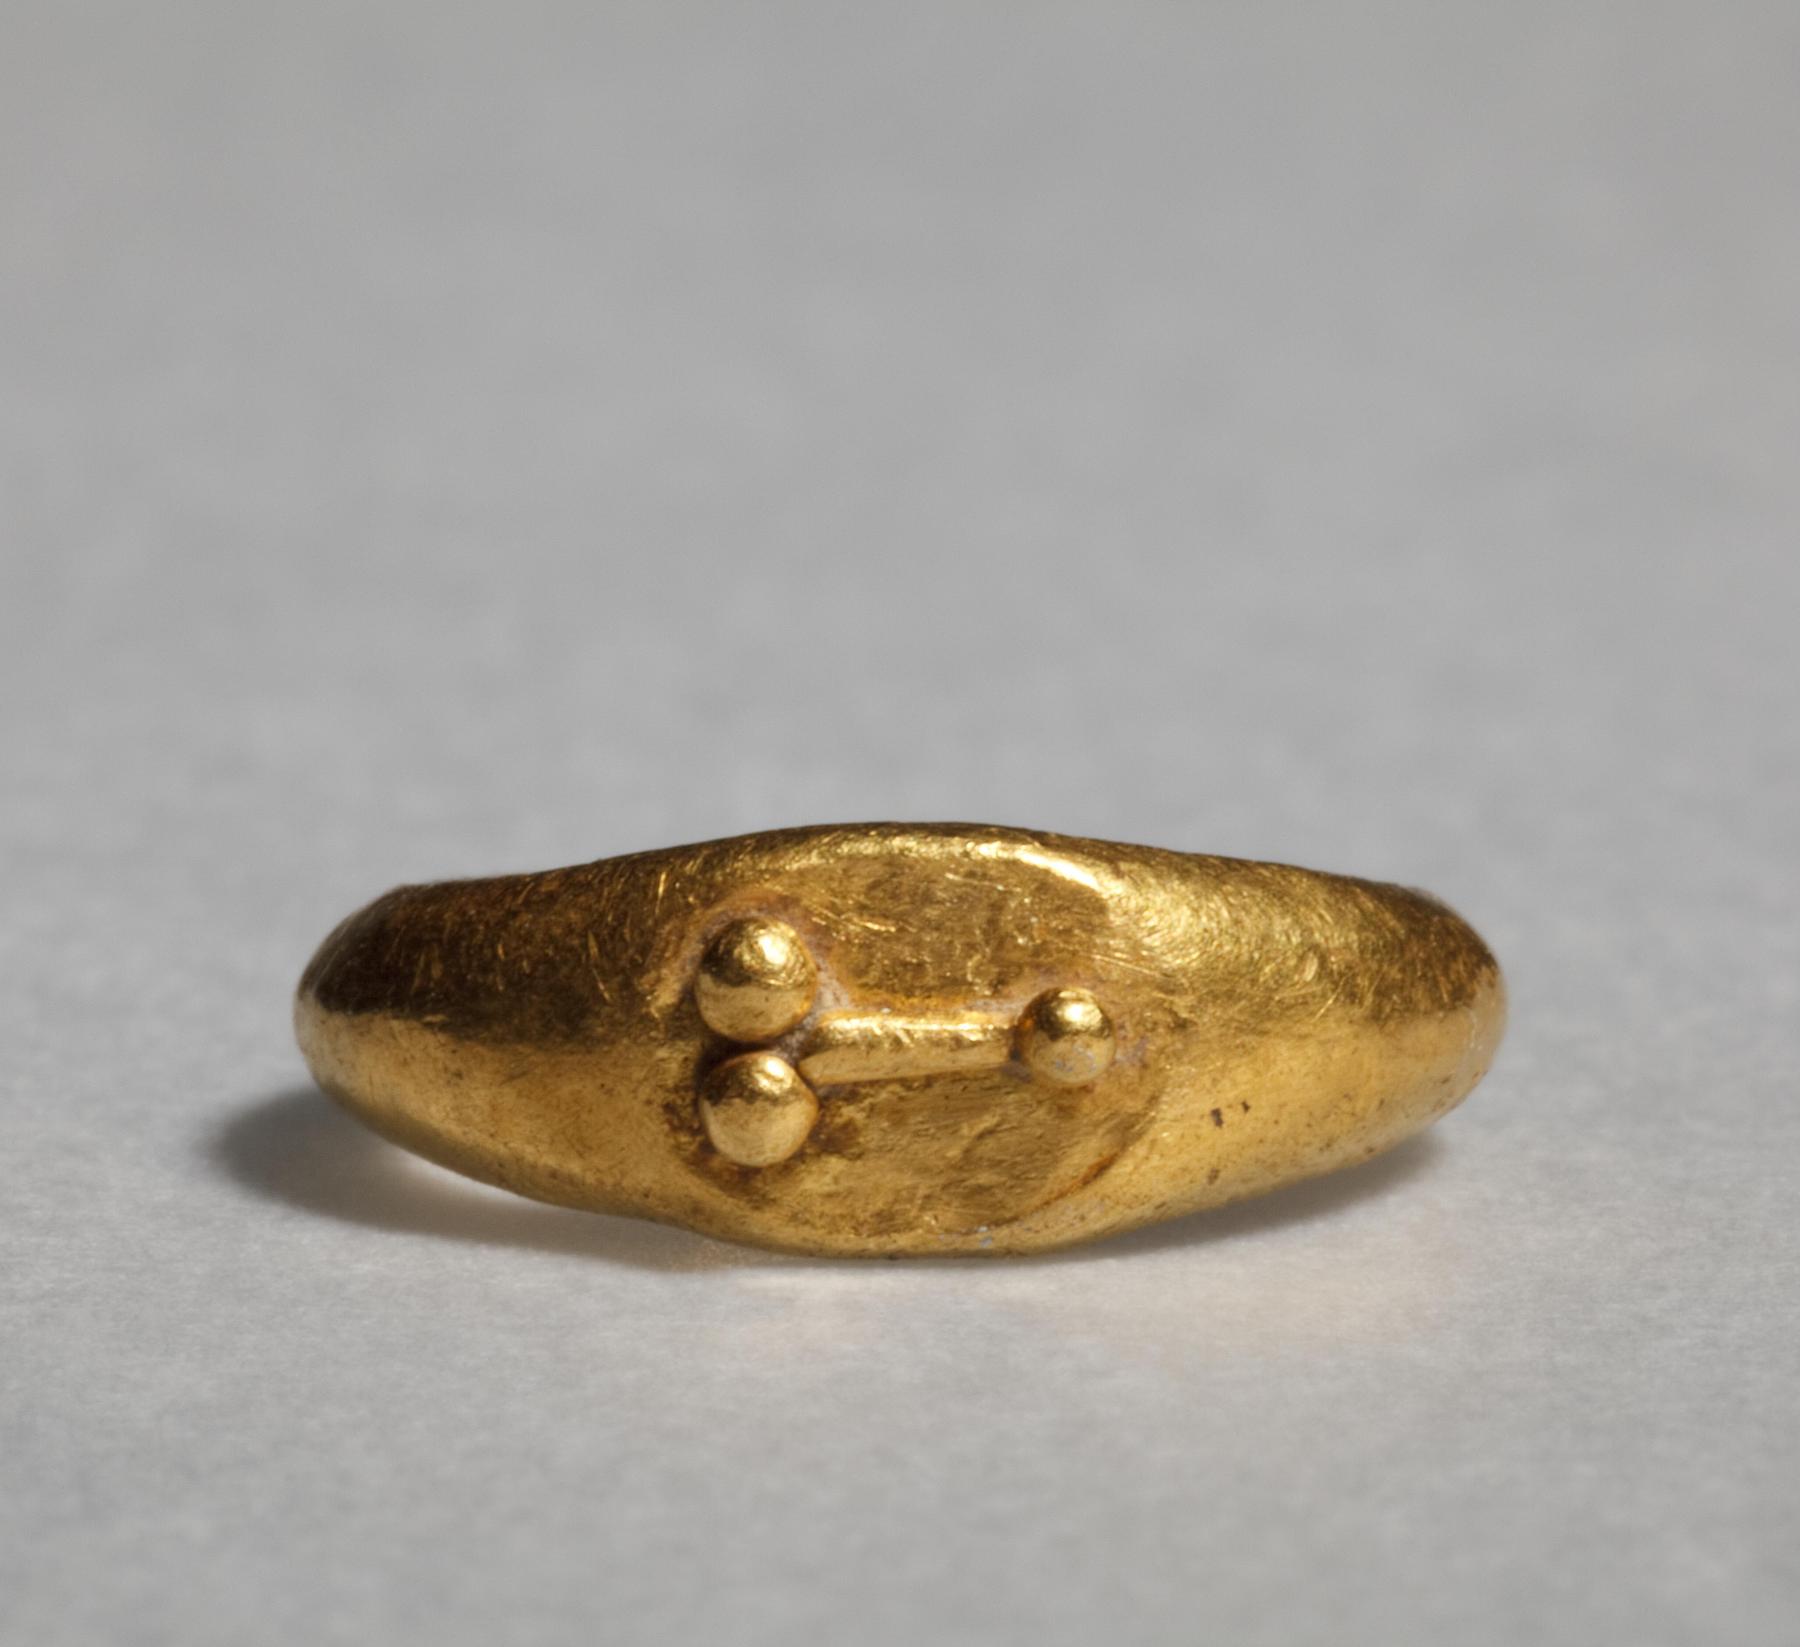 Finger ring with a phallus in relief, H1816